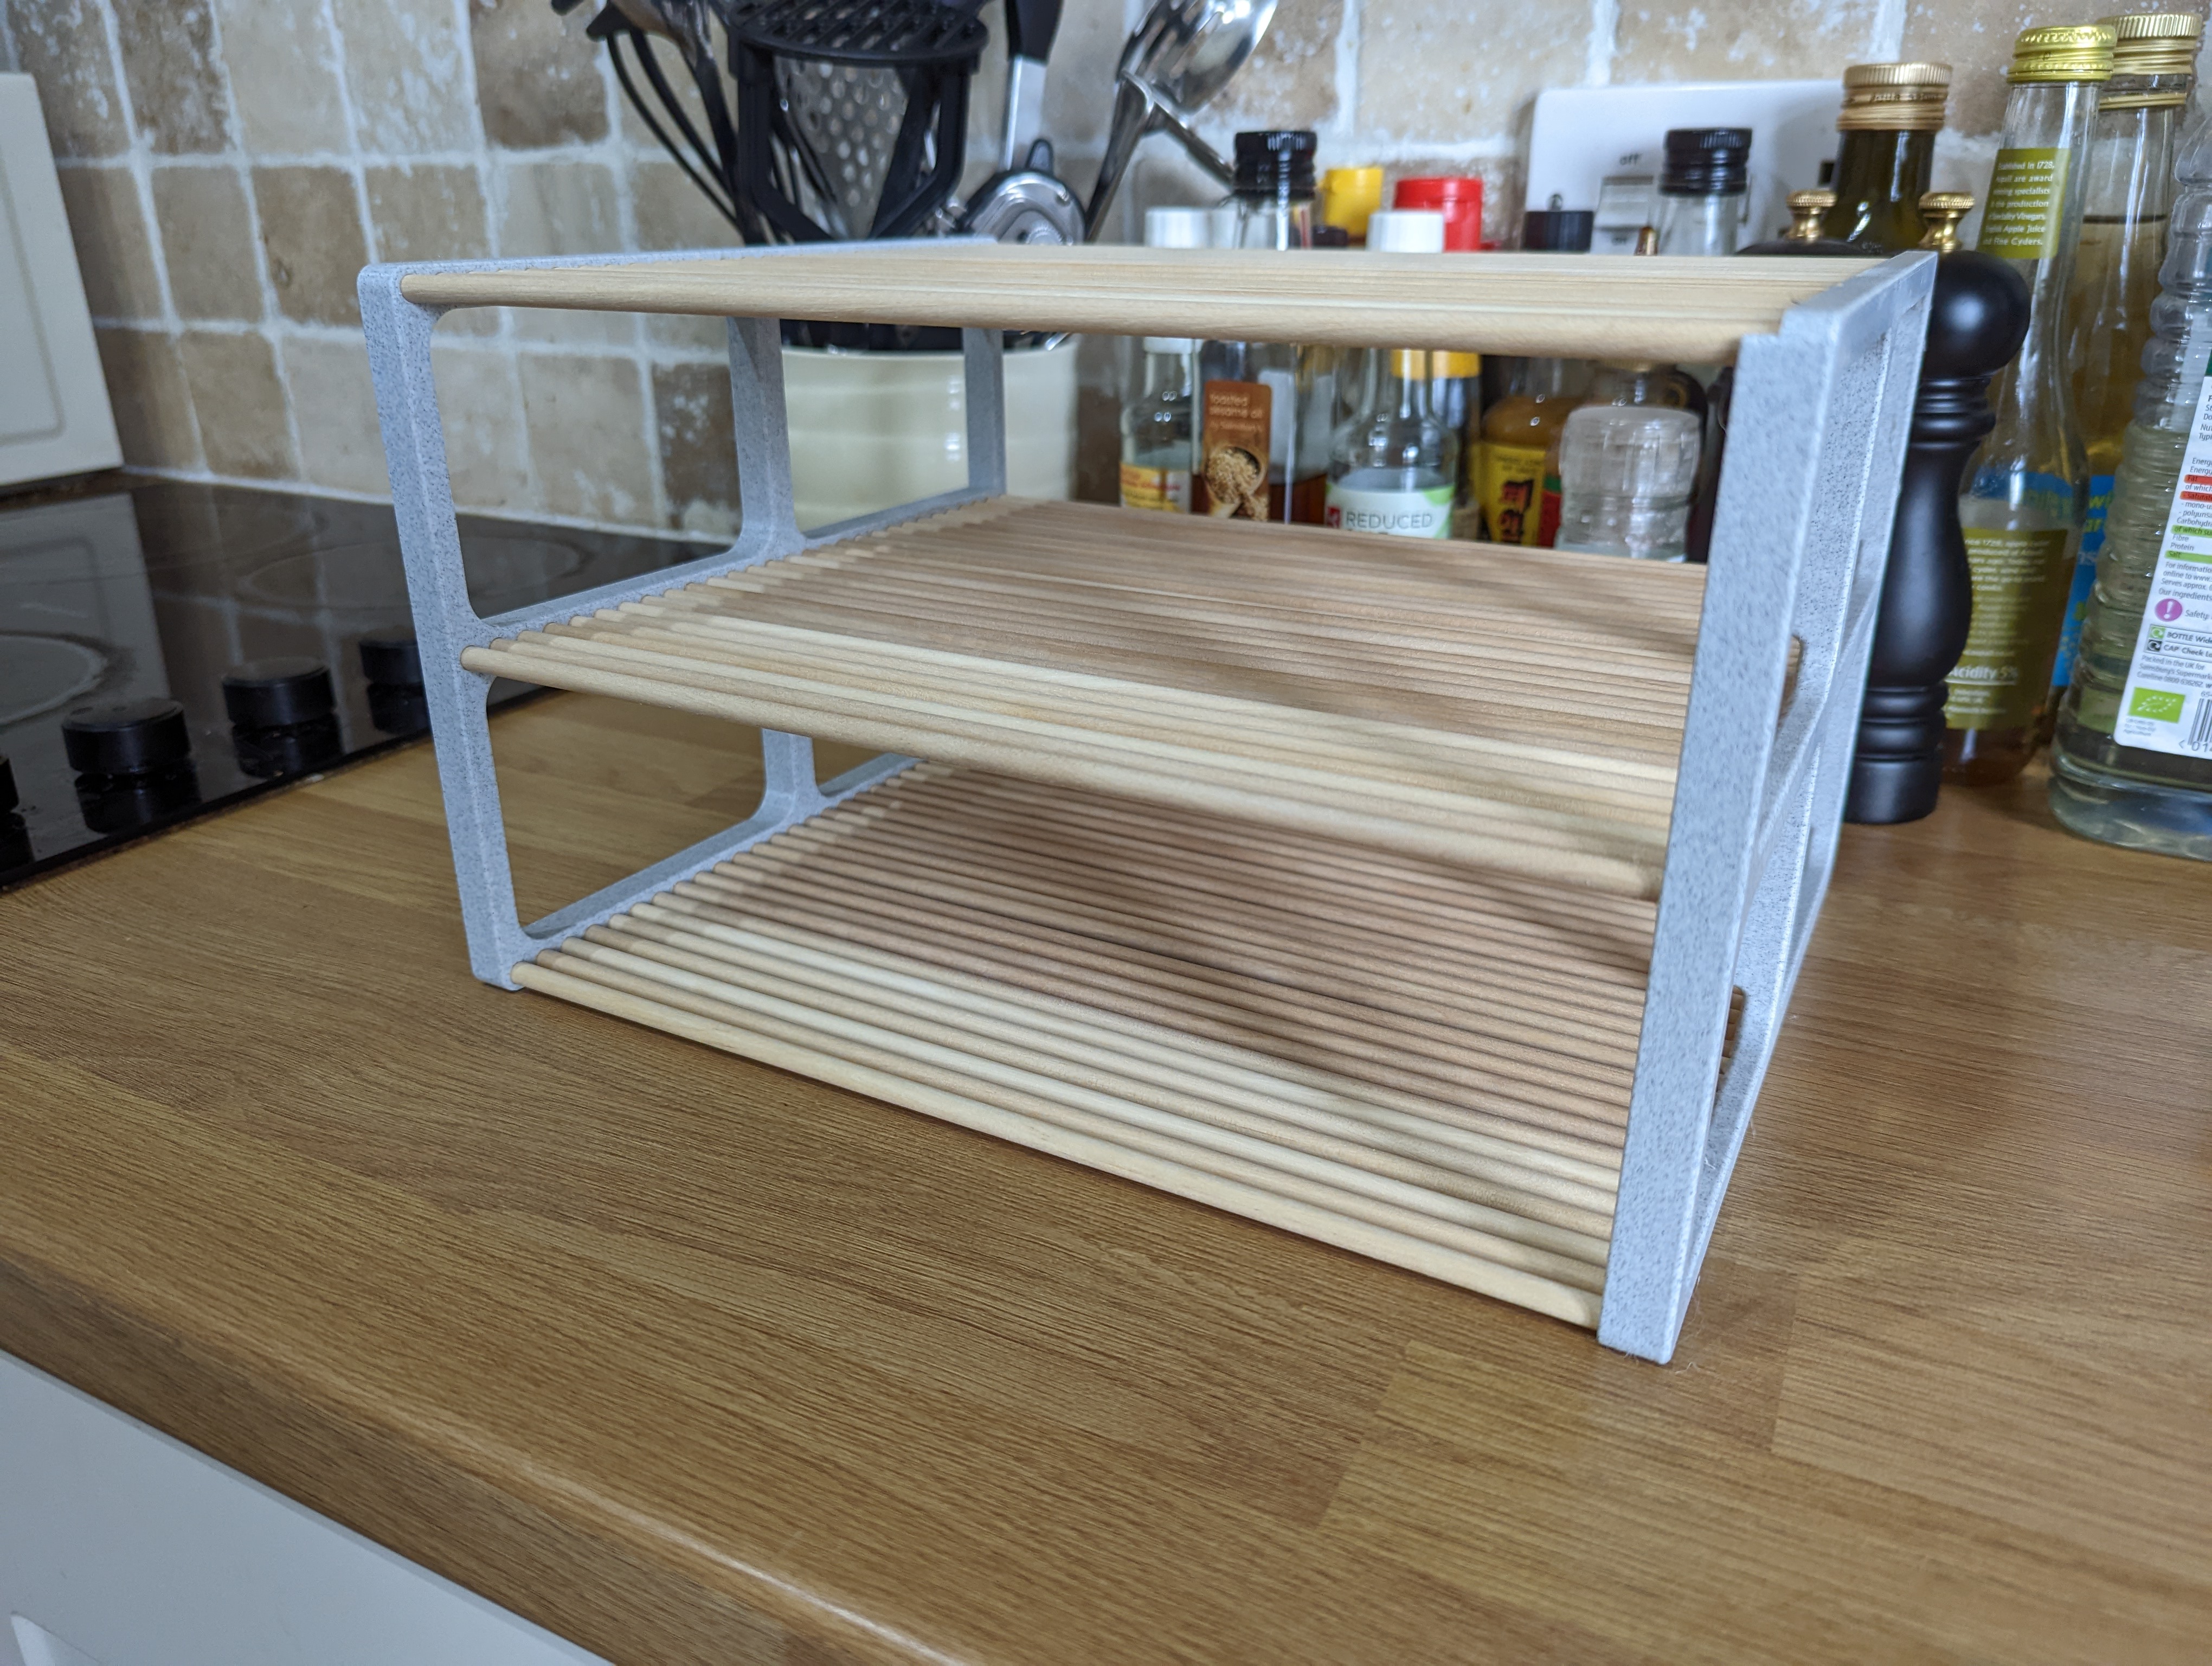 Wooden dowel shelf (Great for kitchens or offices alike)